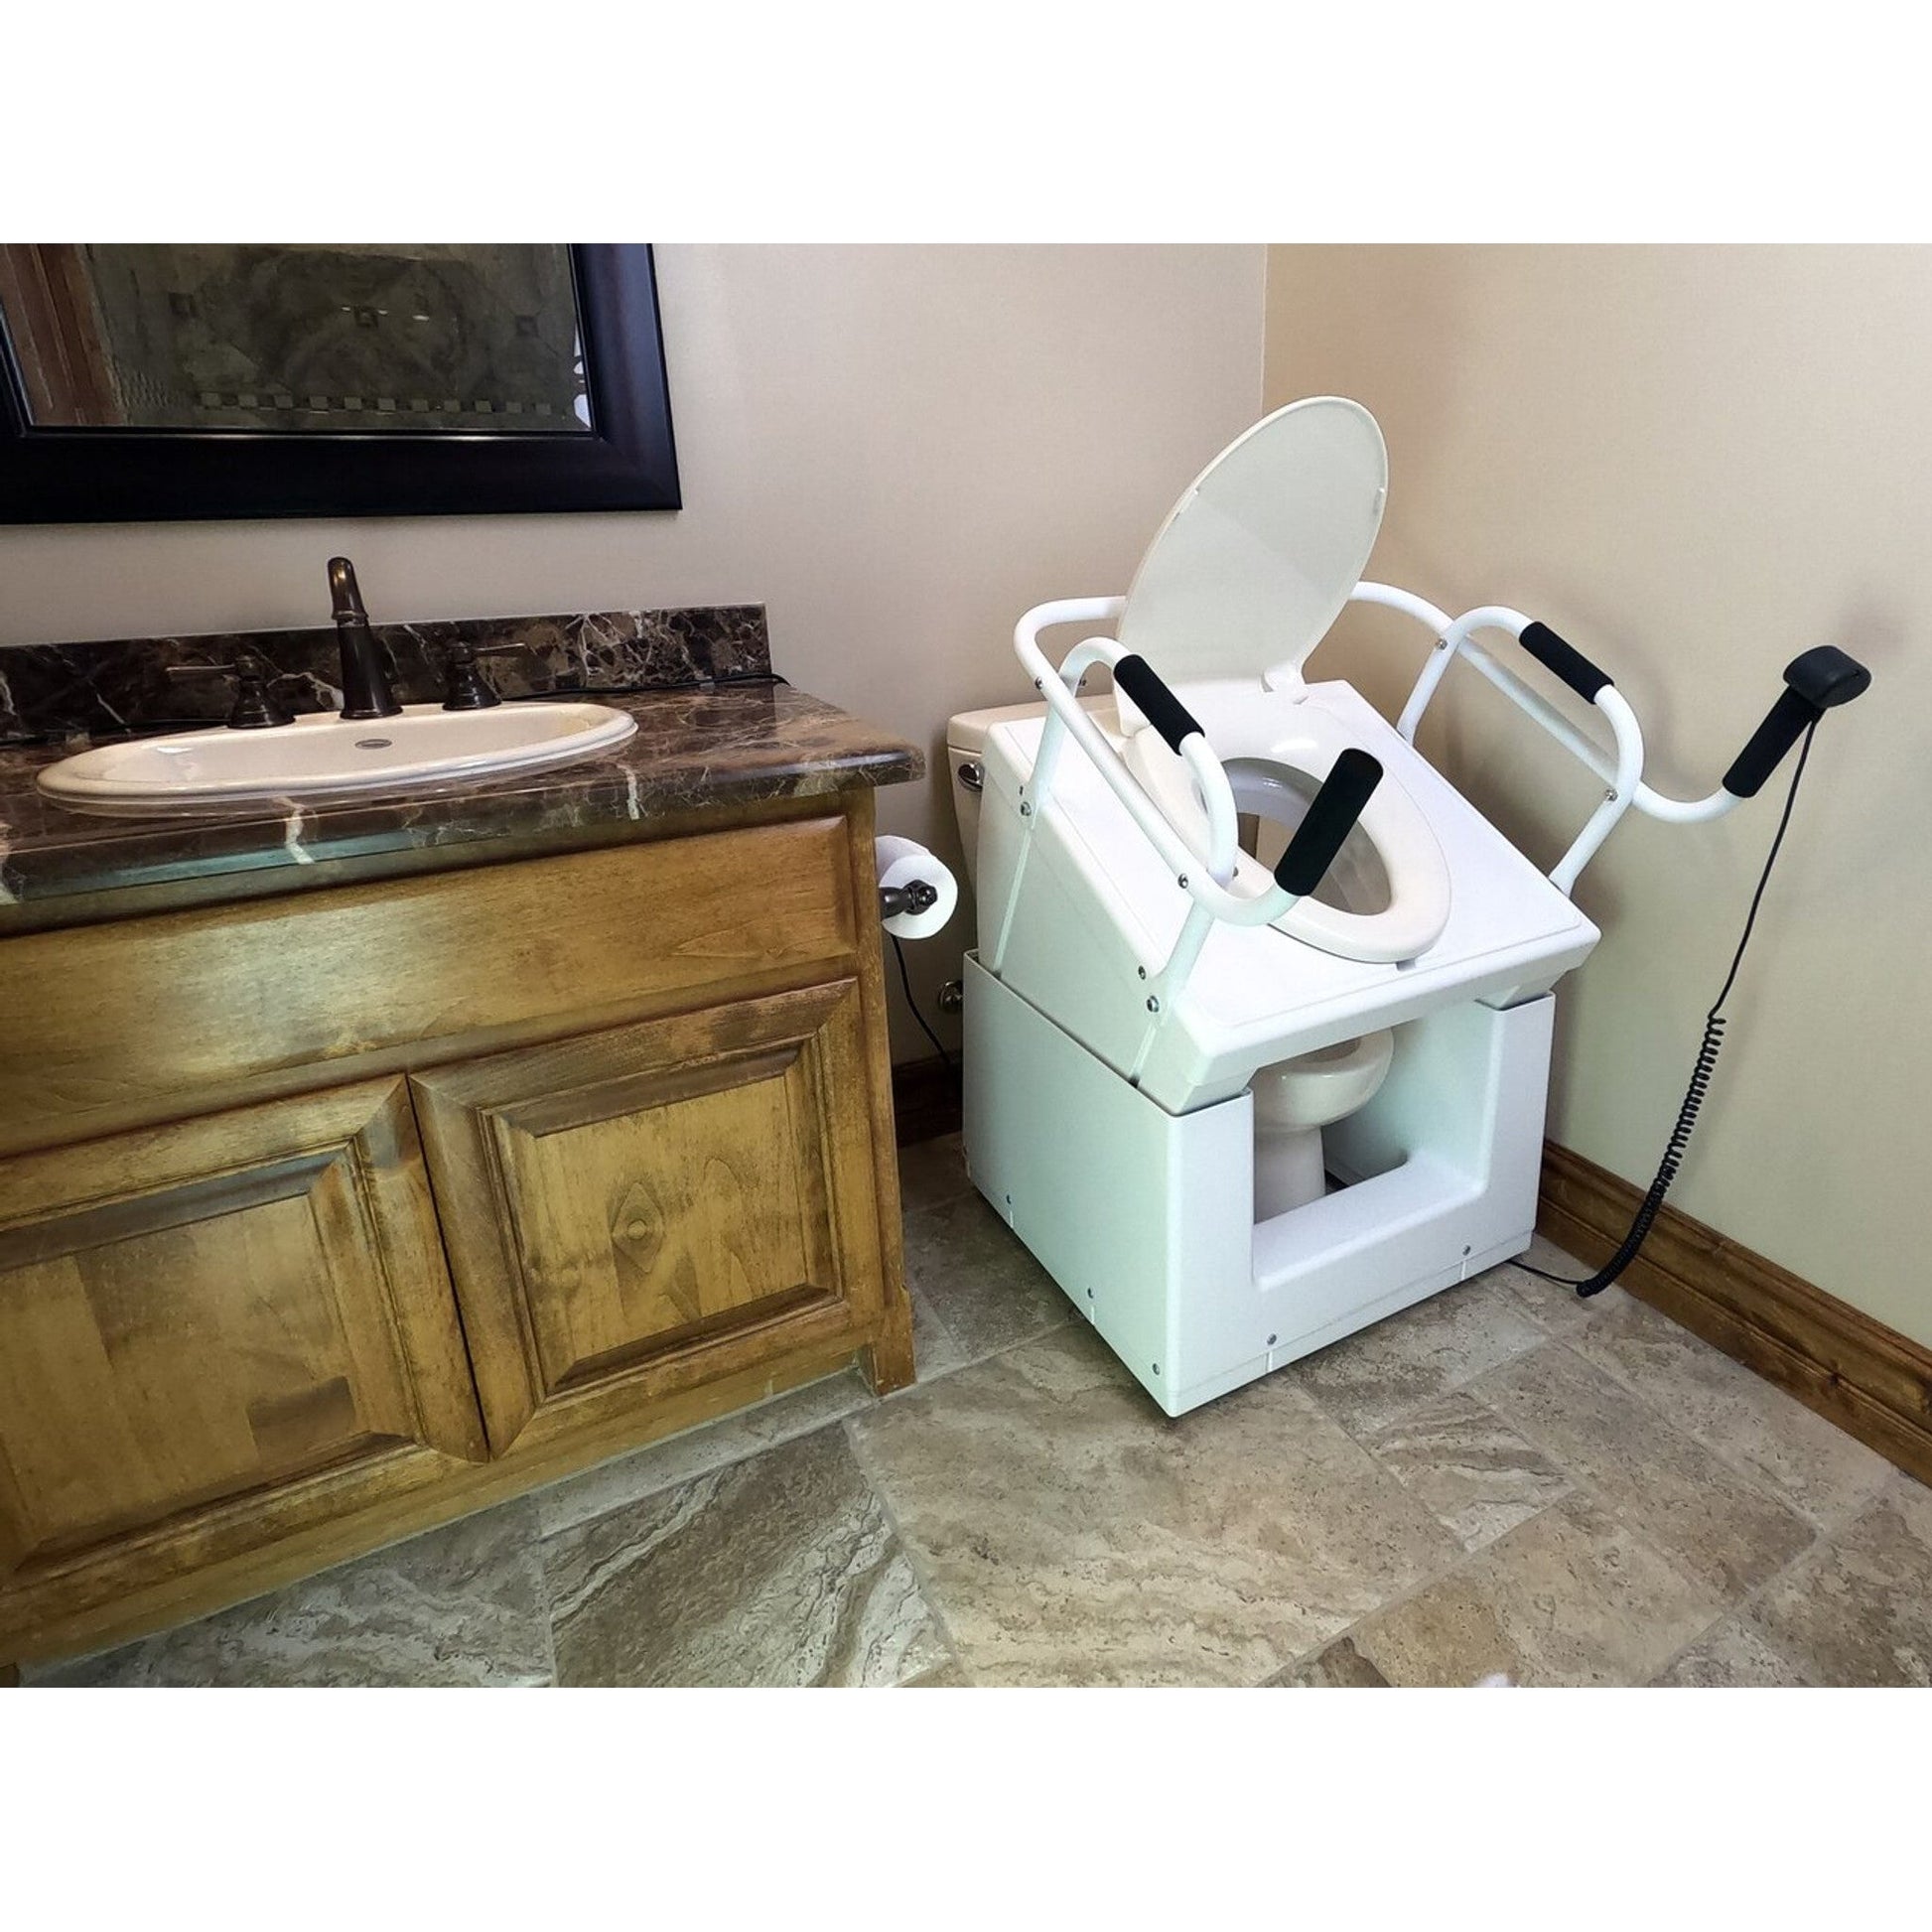 Throne Buttler 37" Powered Toilet Lift Chair With 26" Standard Handle Bar, Bidet Seat and Fitted Splash Guard